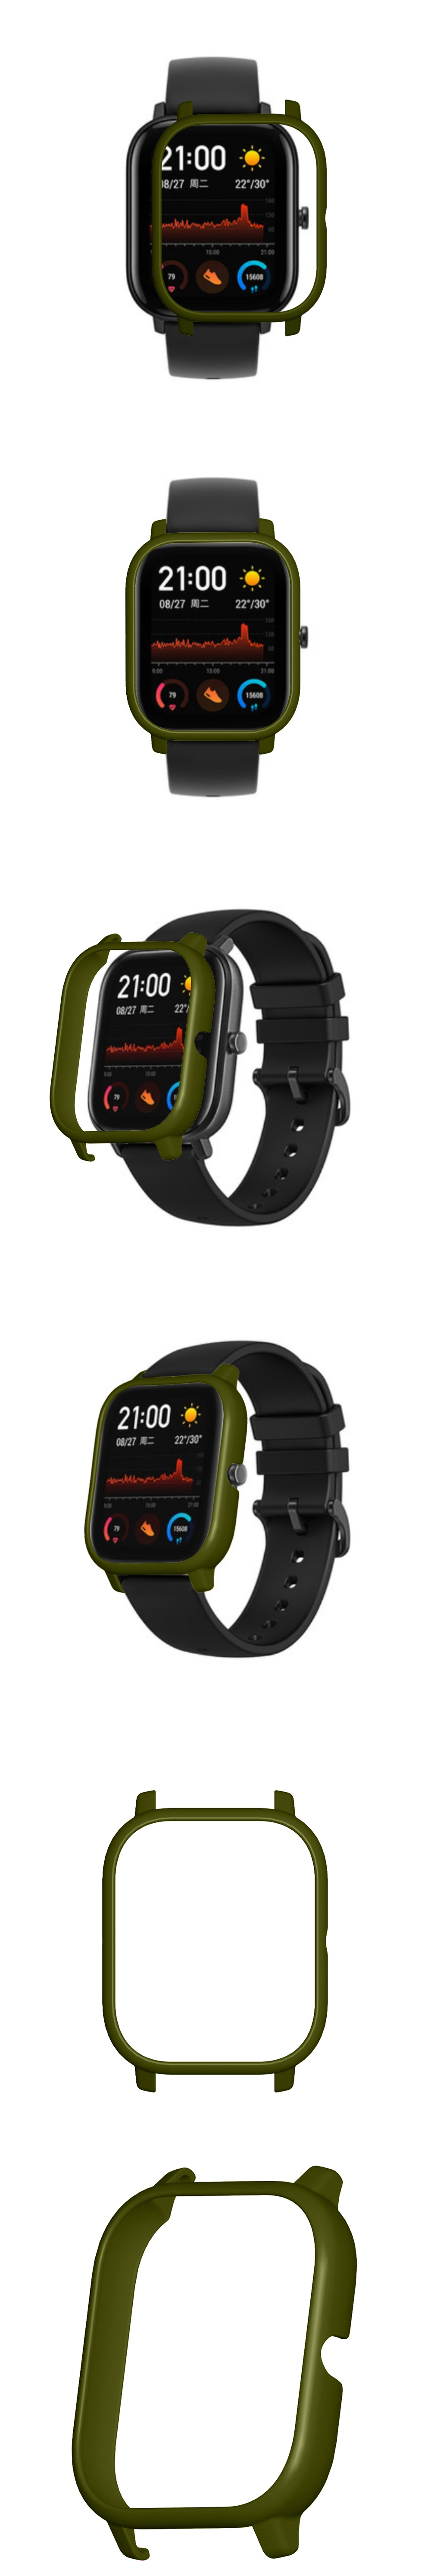 Color-PC-Watch-Case-Cover-Watch-Cover-Screen-Protector-for-Amazfit-GTS-1582191-4